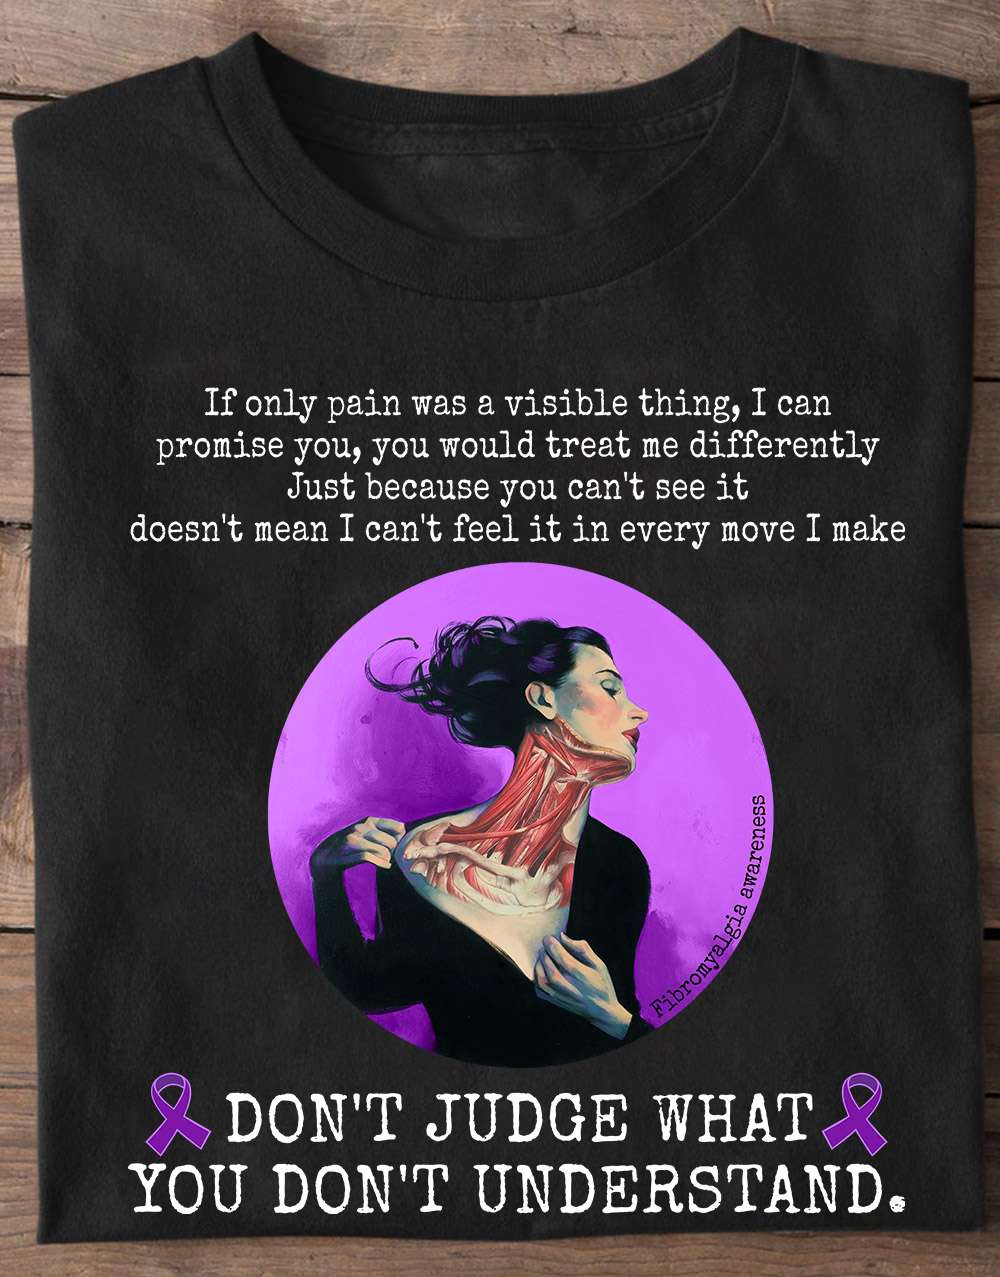 Fibromyalgia Woman, Fibromyalgia Awareness - If only pain waas a visible thing i can promise you you would treat me